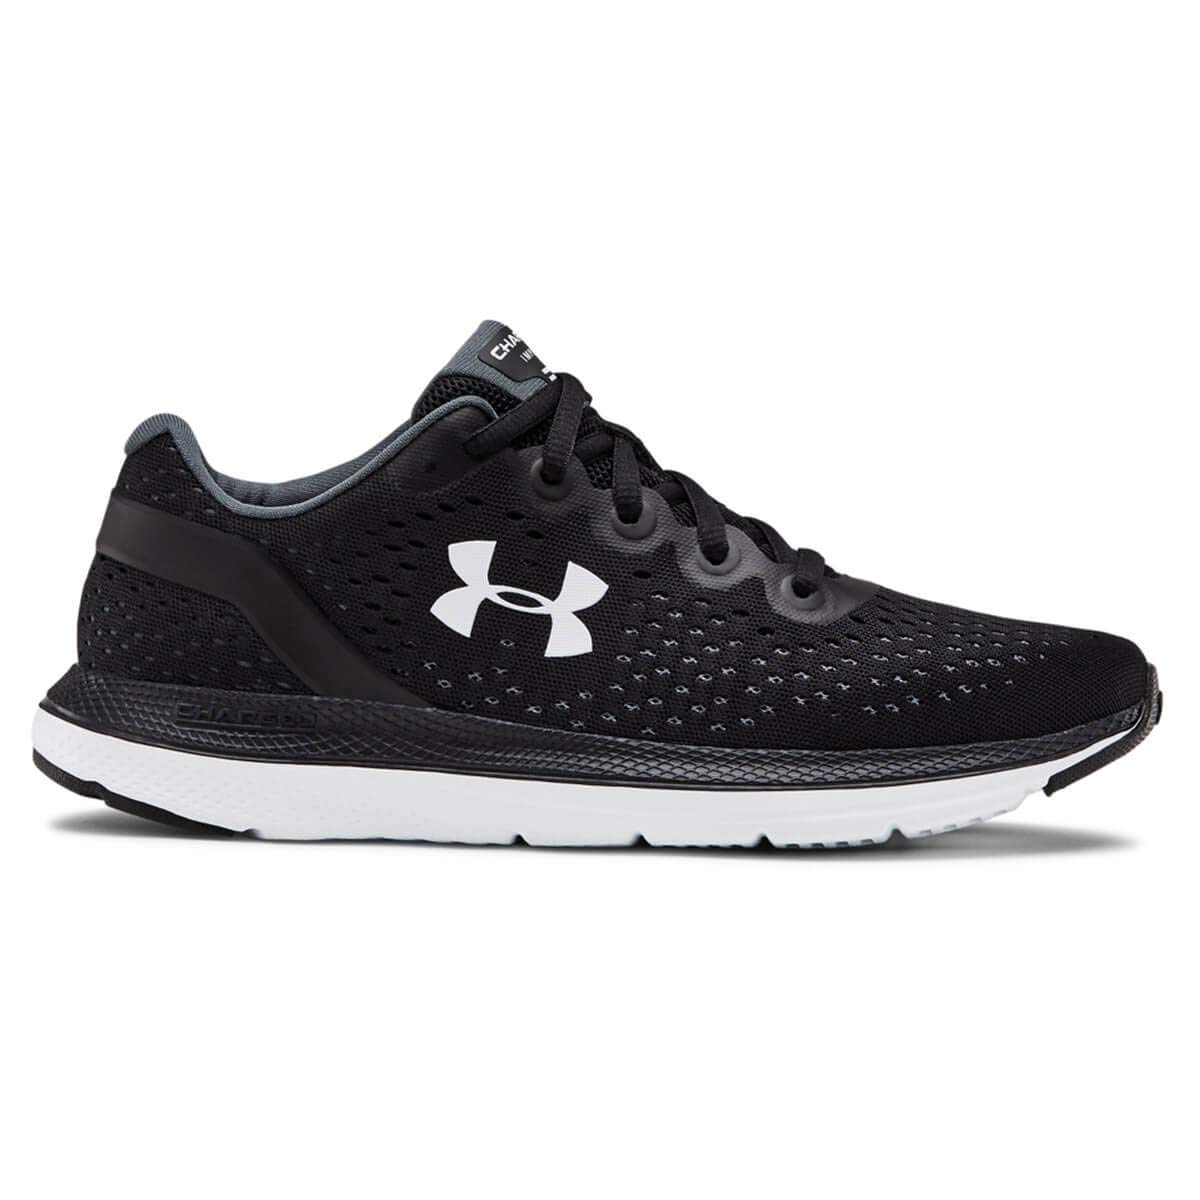 Under Armour Women's UA Charged Impulse Running Shoes 6.5 Black